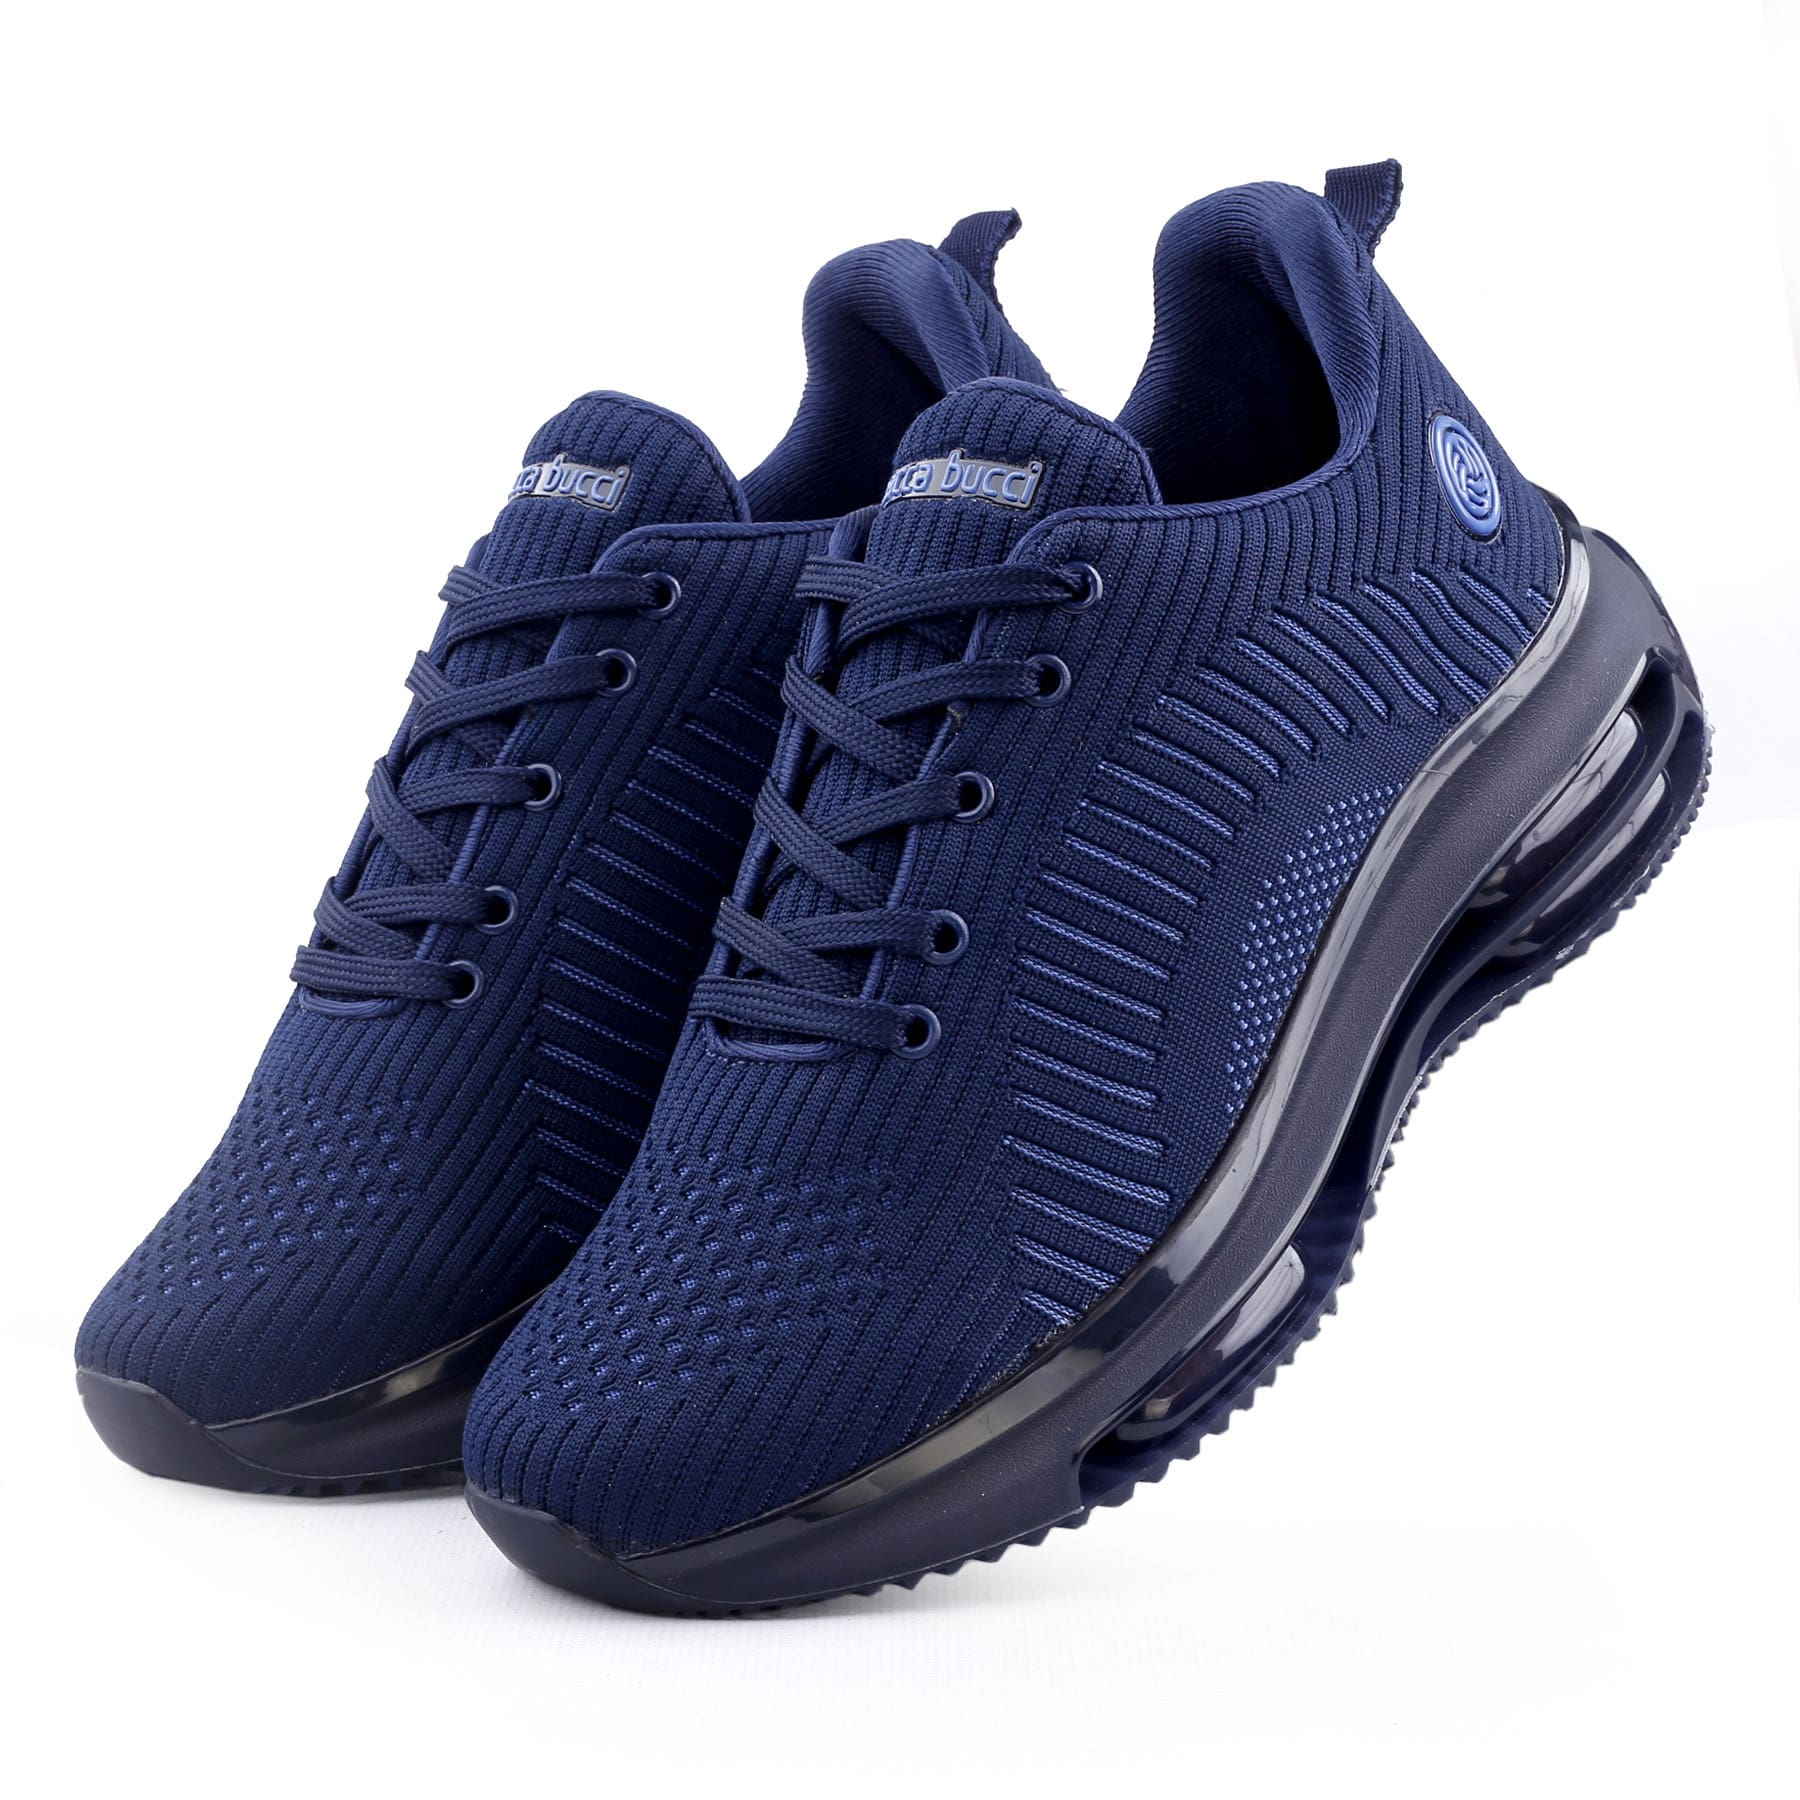 Bacca Bucci HERCULES Men Sports Sneakers -Outdoor, Gym & Training | With Thick Triple Air Bounce Comfort Outsole